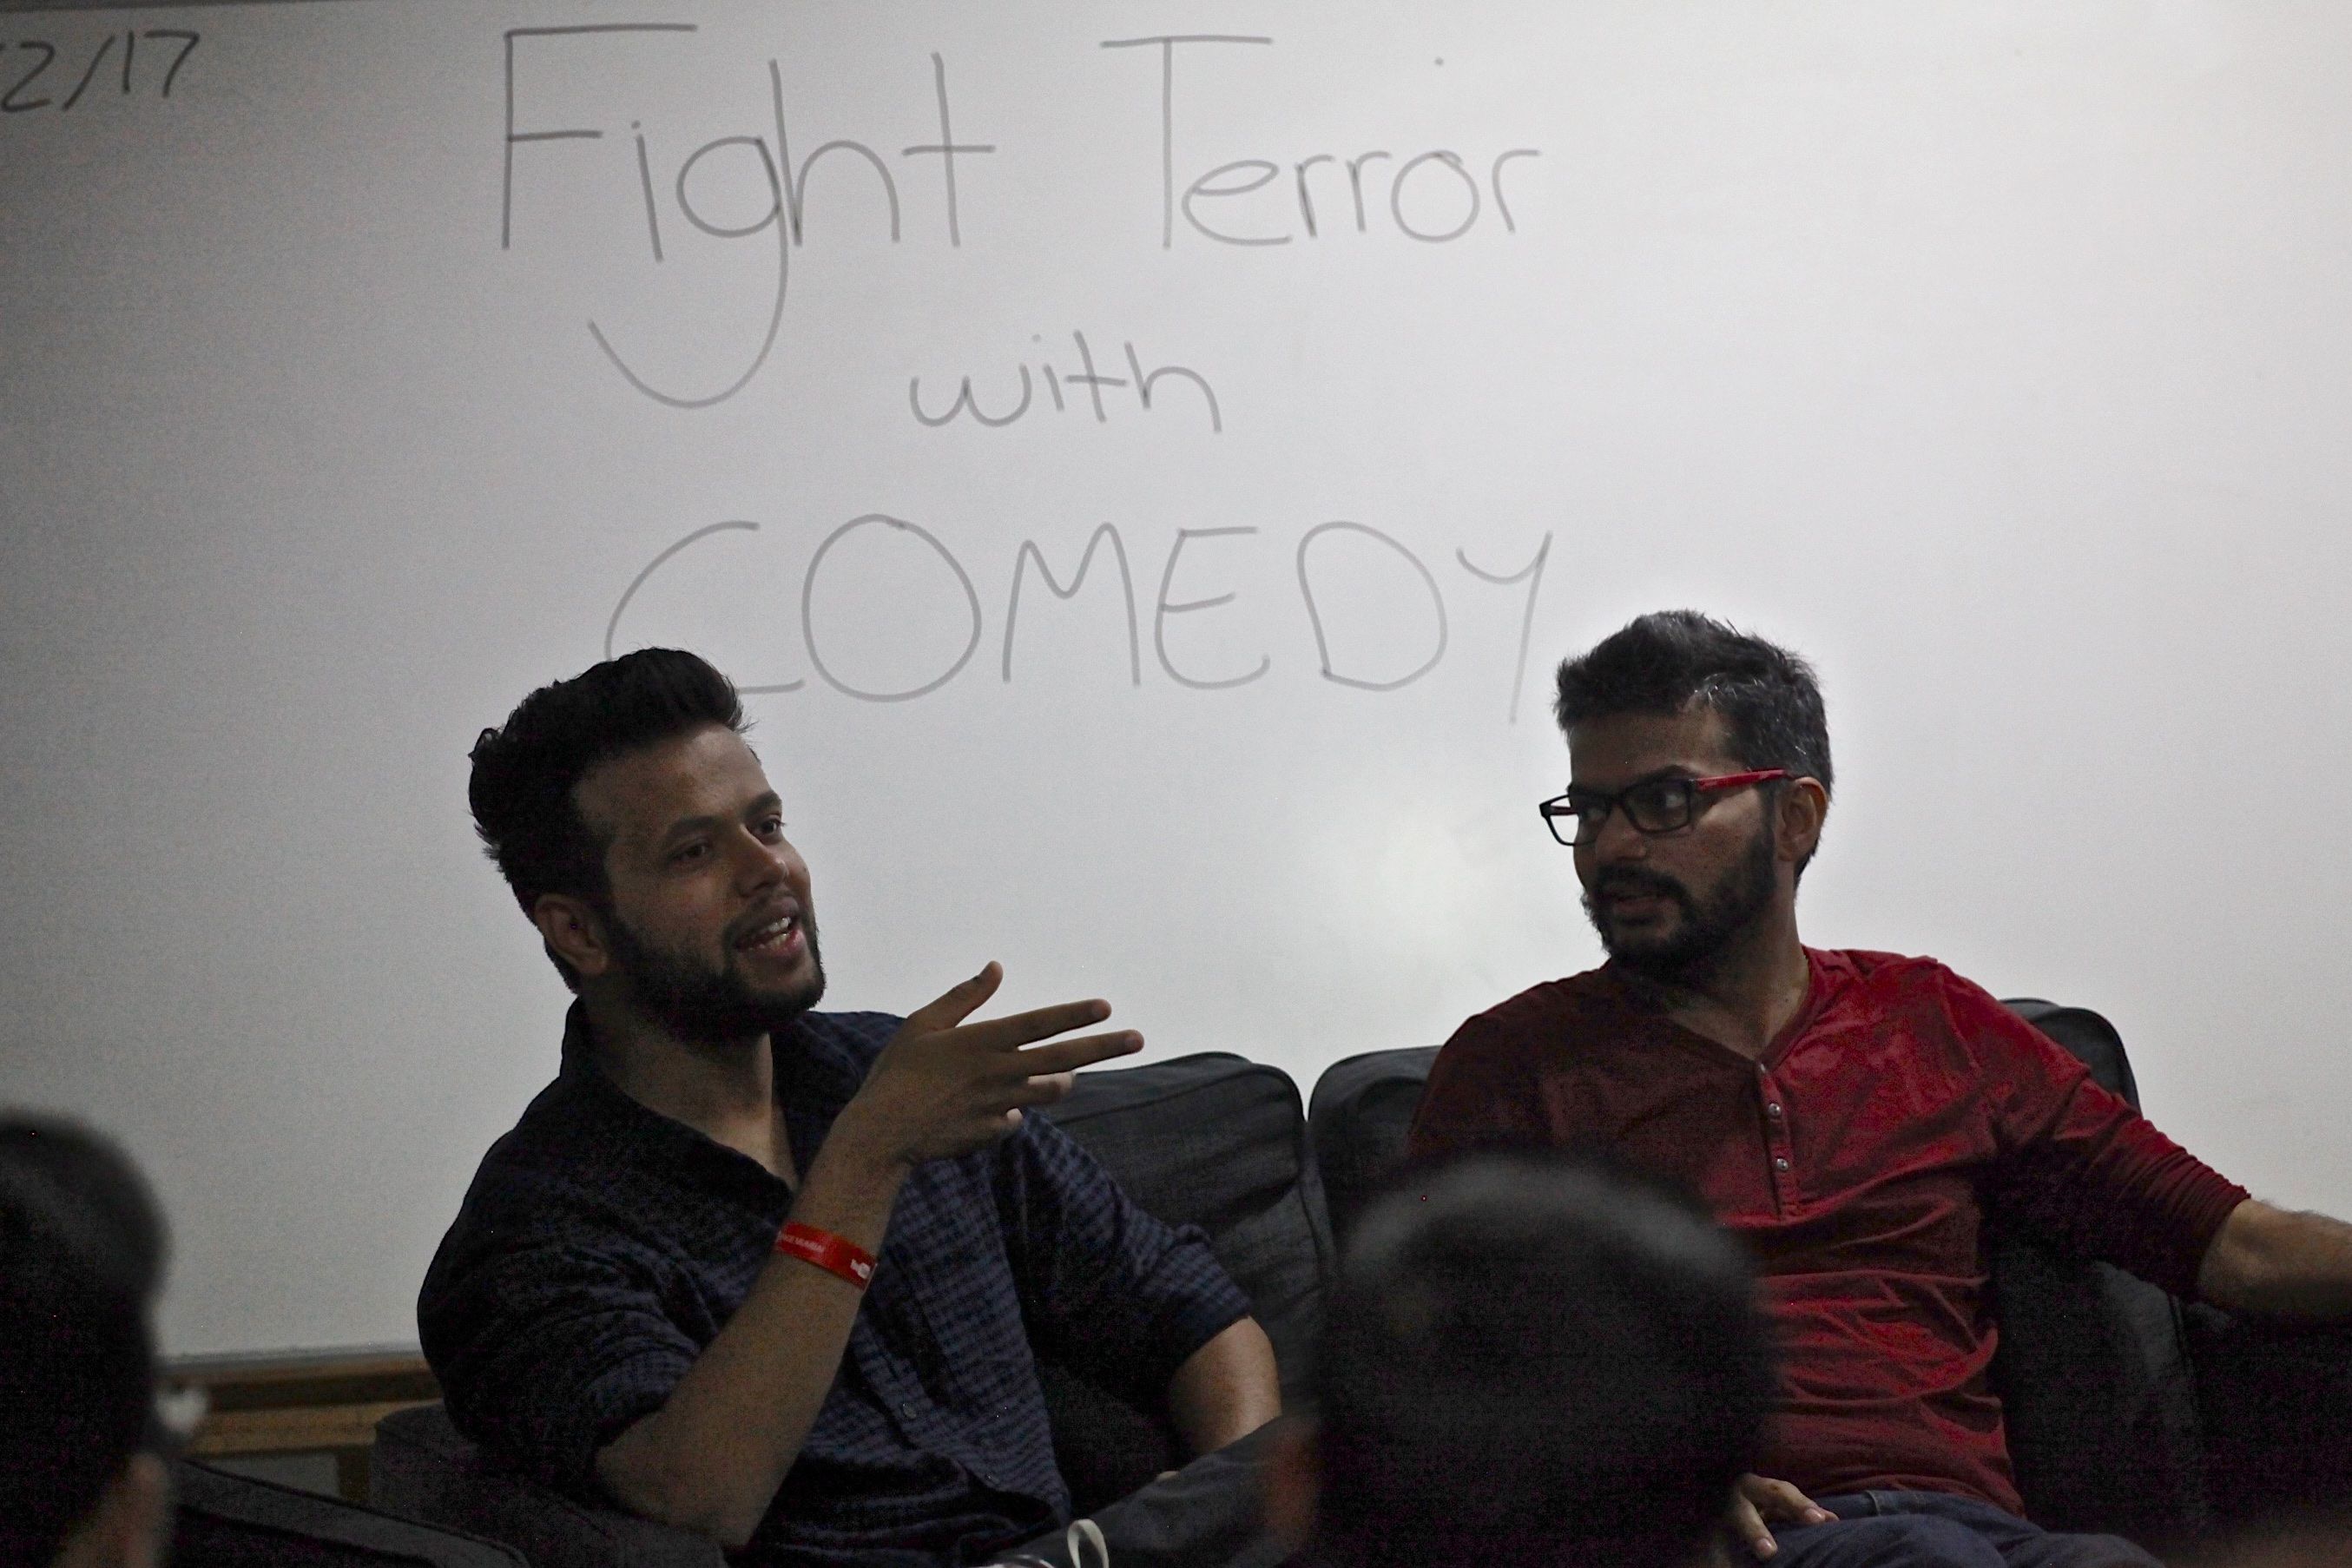 East India Comedy members Kunal Rao and Sapan Verma at a workshop hosted by the U.S. State Department. Image by Wes Bruer. India, 2017.